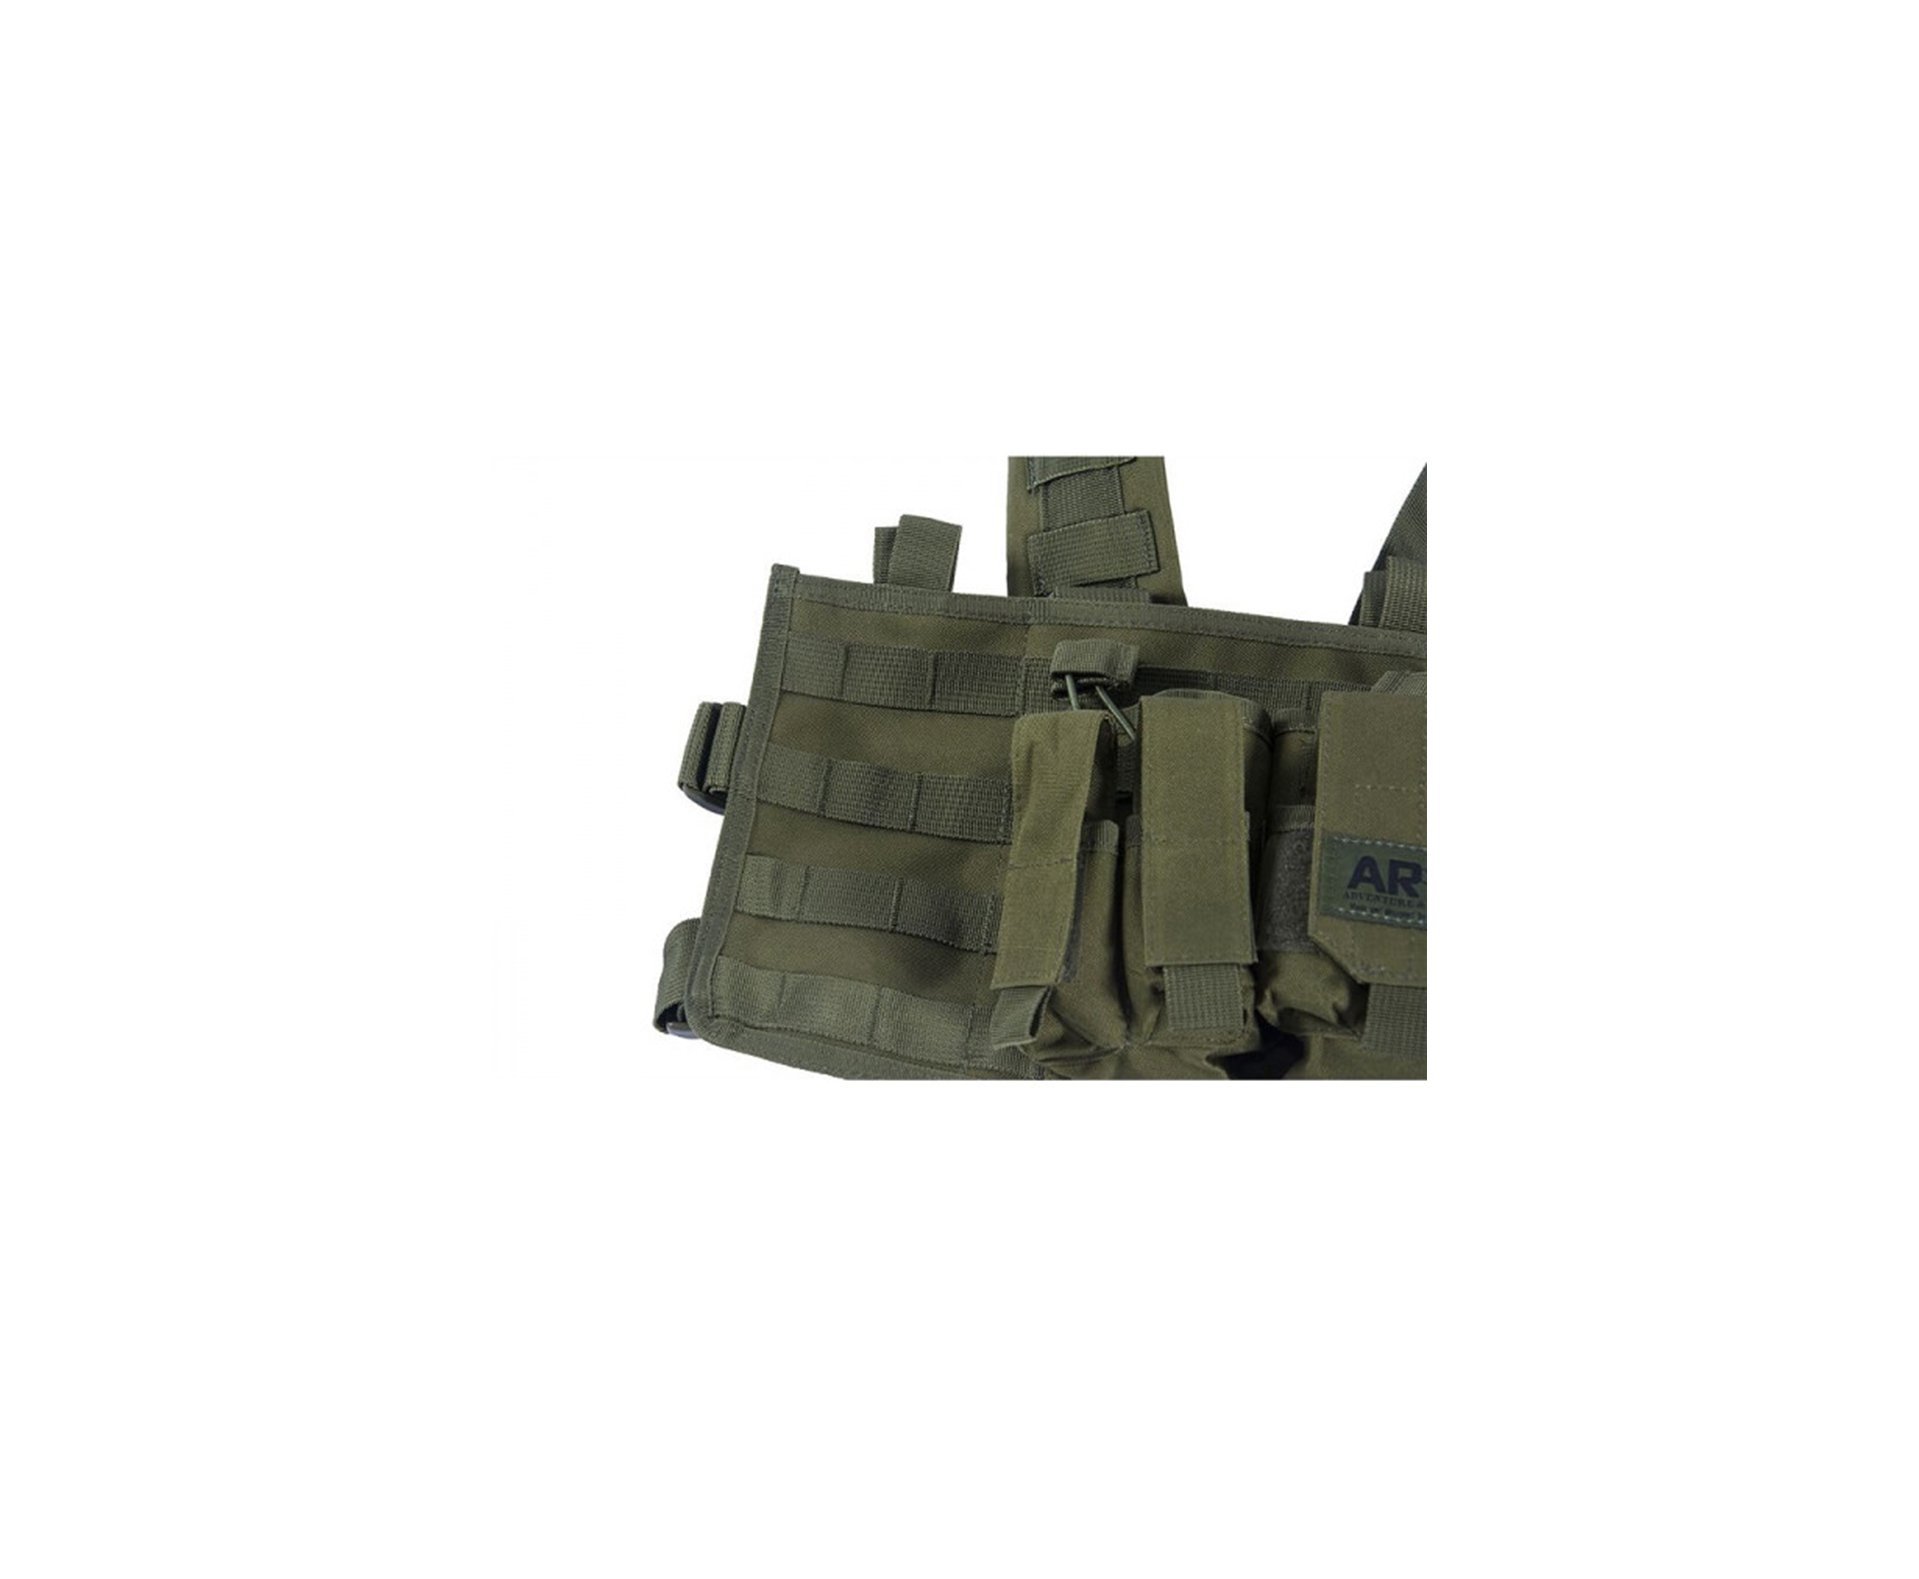 Colete Chest Rig Tactical Harness Ct-2087od